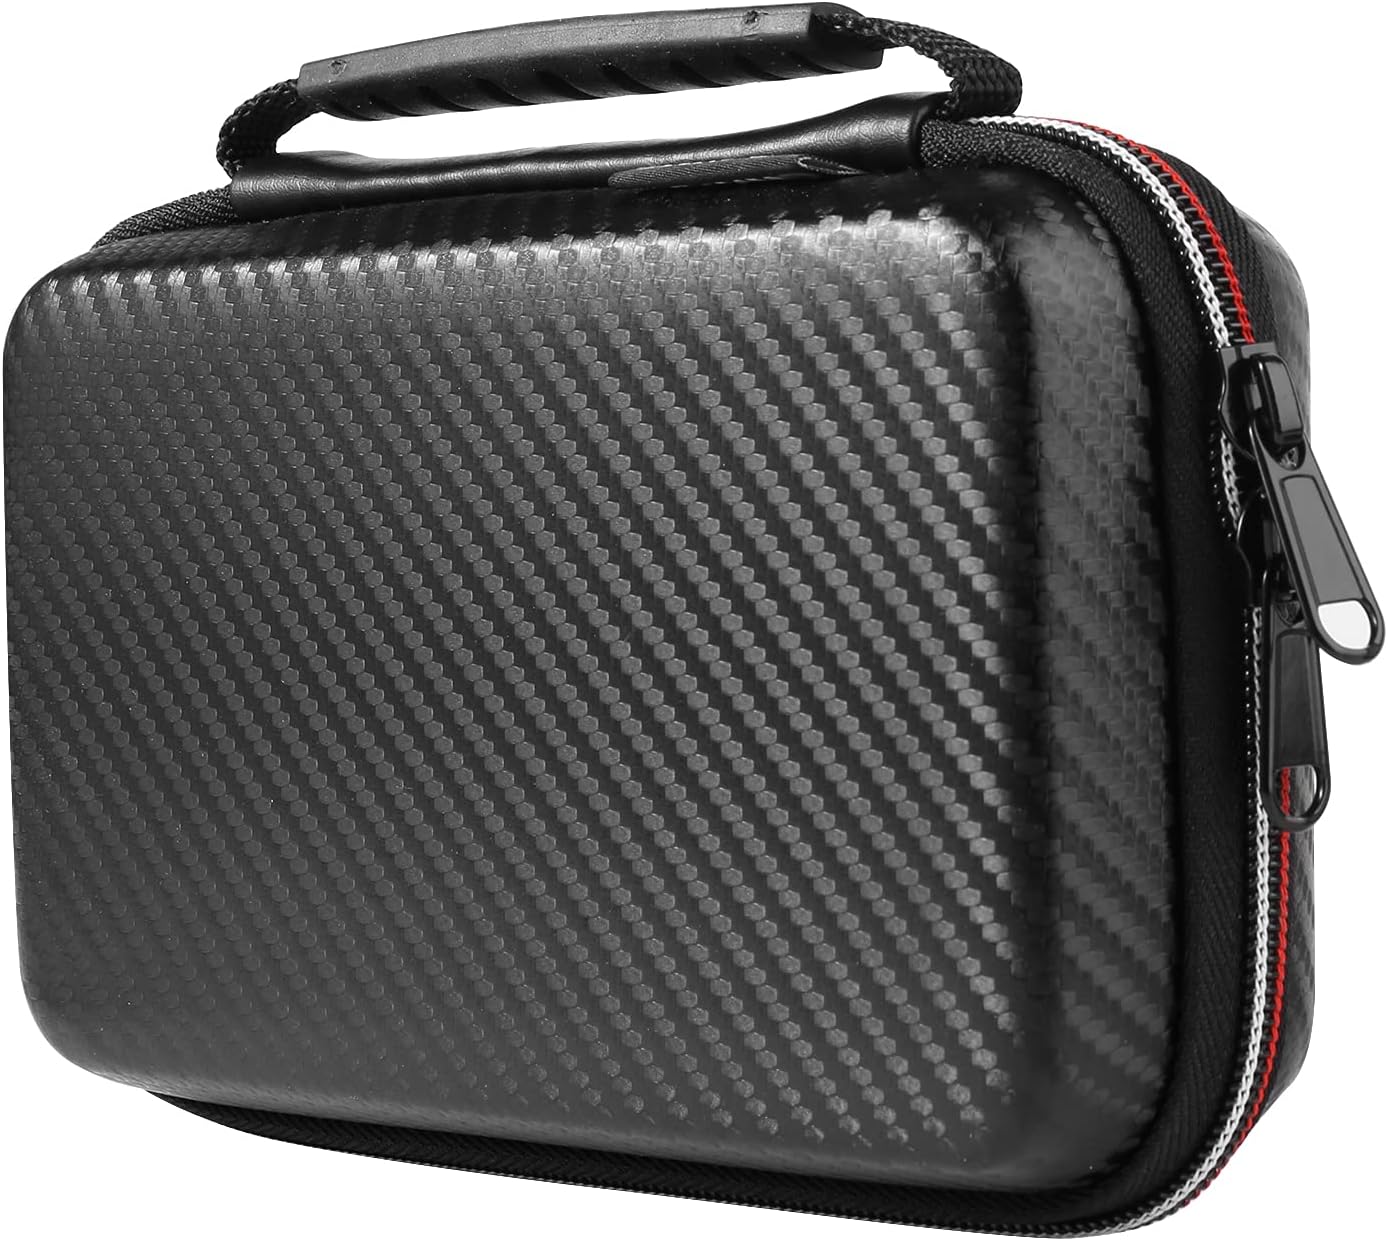 Diabetic Organizer Carrying Case Review